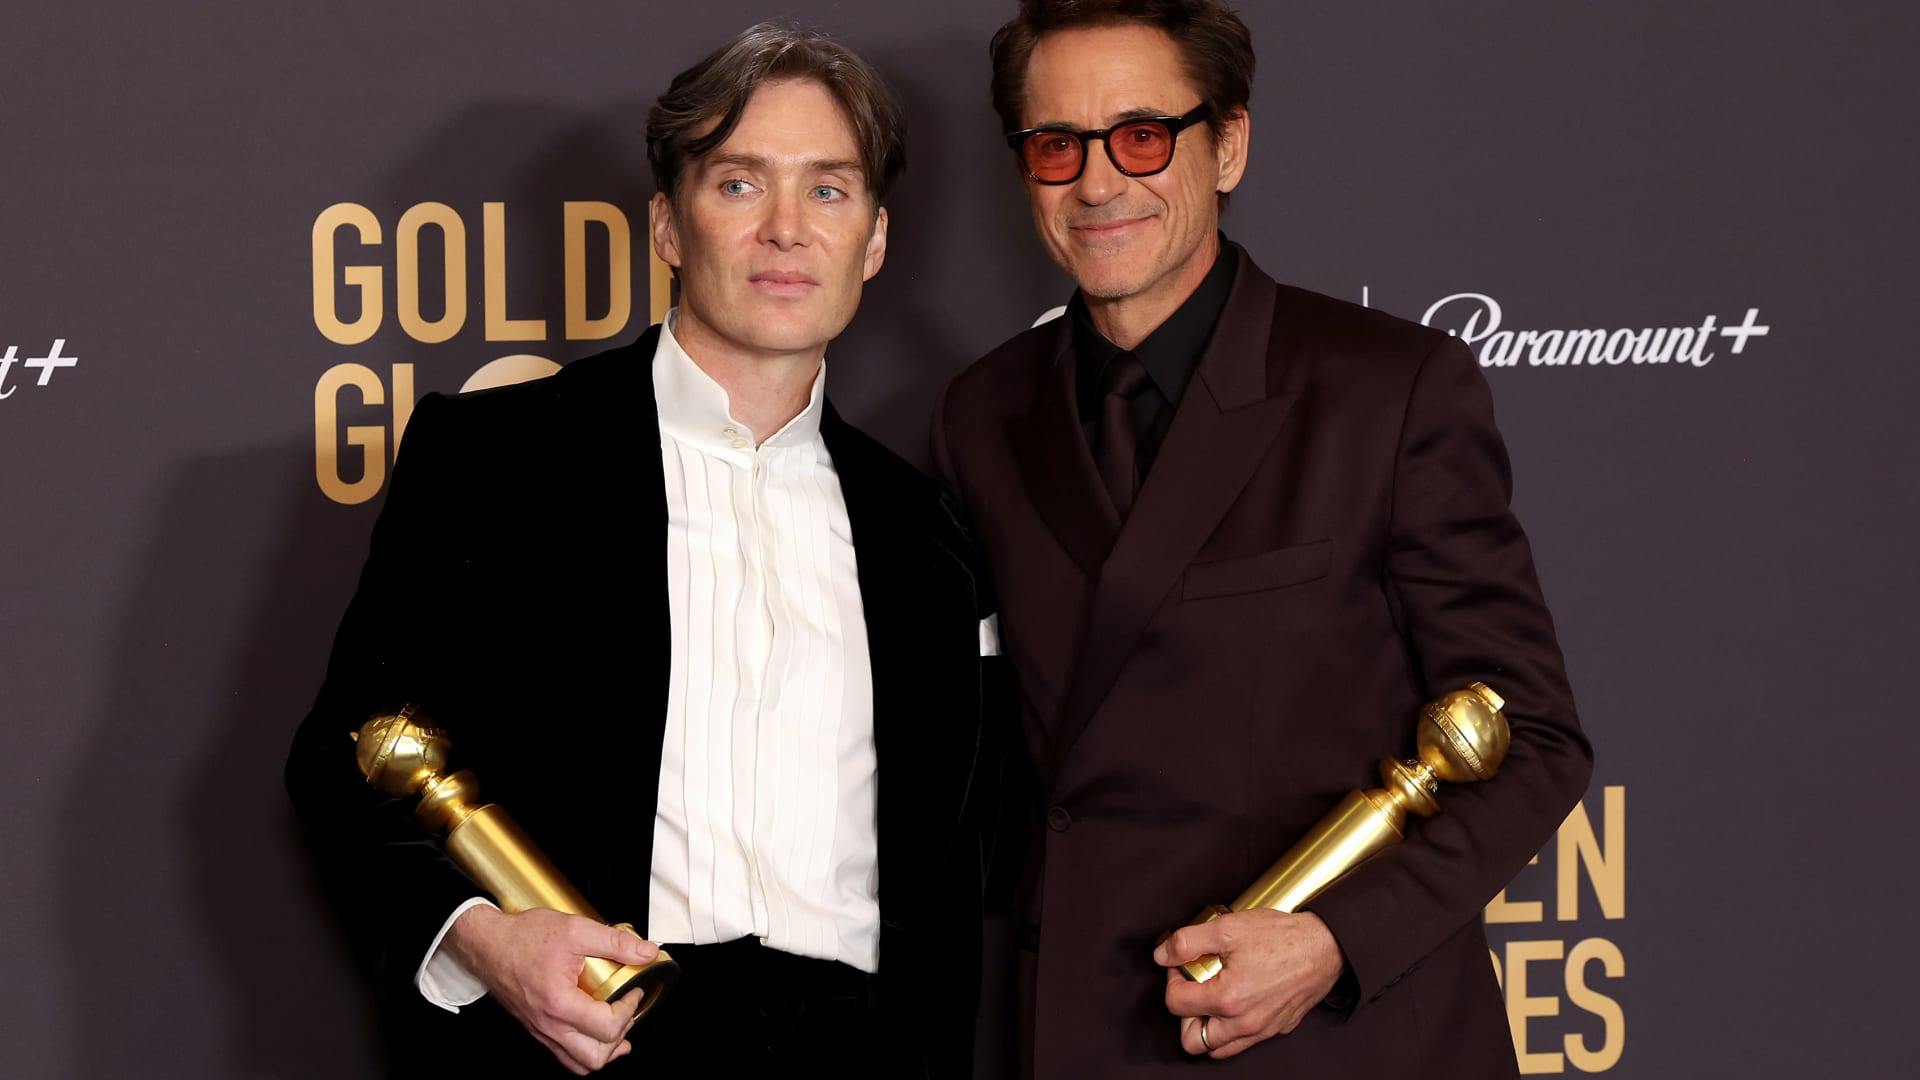 'Oppenheimer' leading Golden Globes with wins for Murphy, Downey Jr. and Nolan